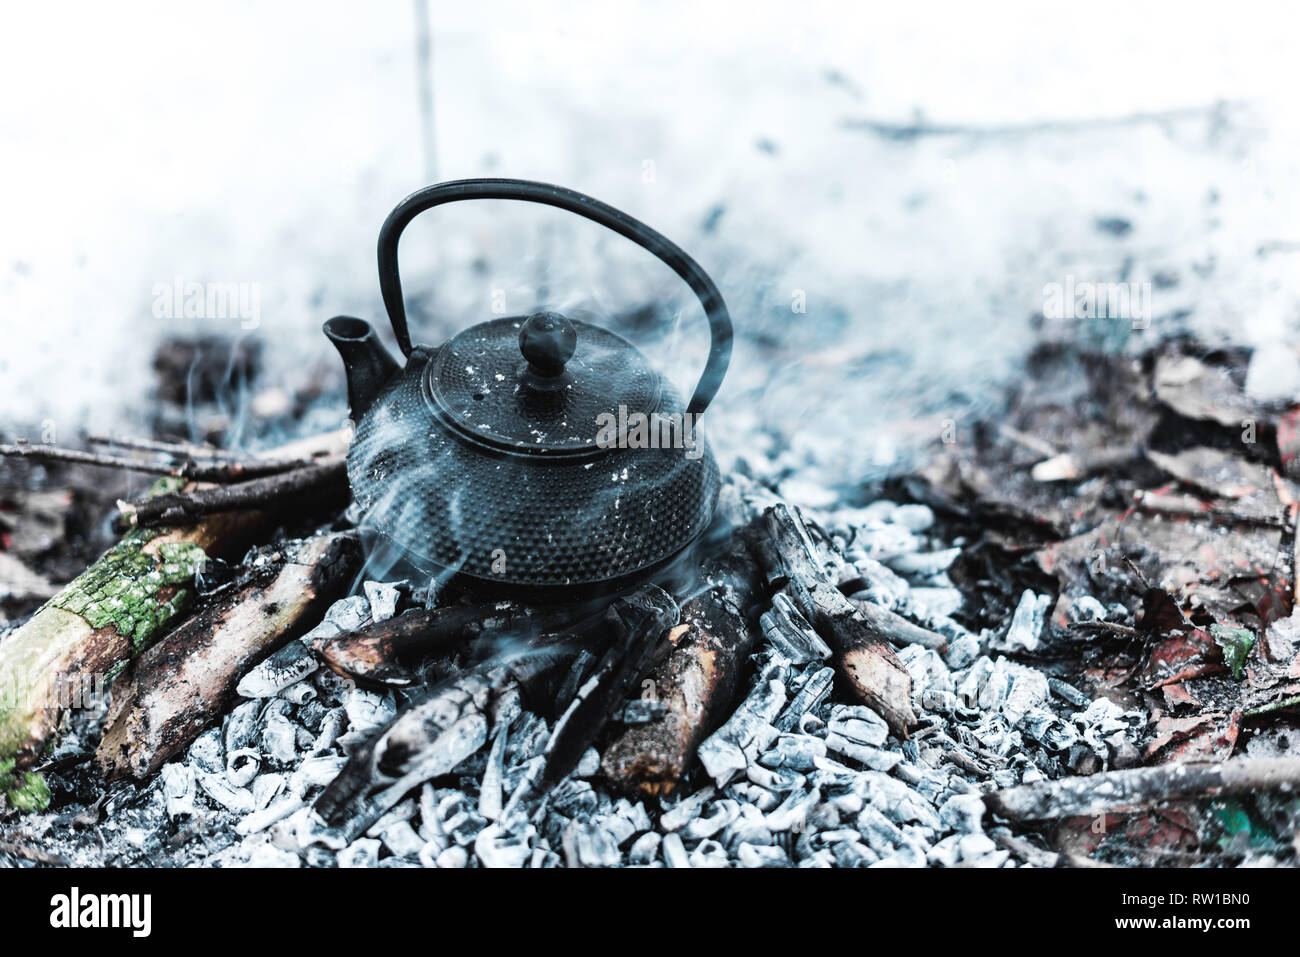 https://c8.alamy.com/comp/RW1BN0/boiling-kettle-with-steam-on-firewood-and-ash-in-winter-forest-RW1BN0.jpg